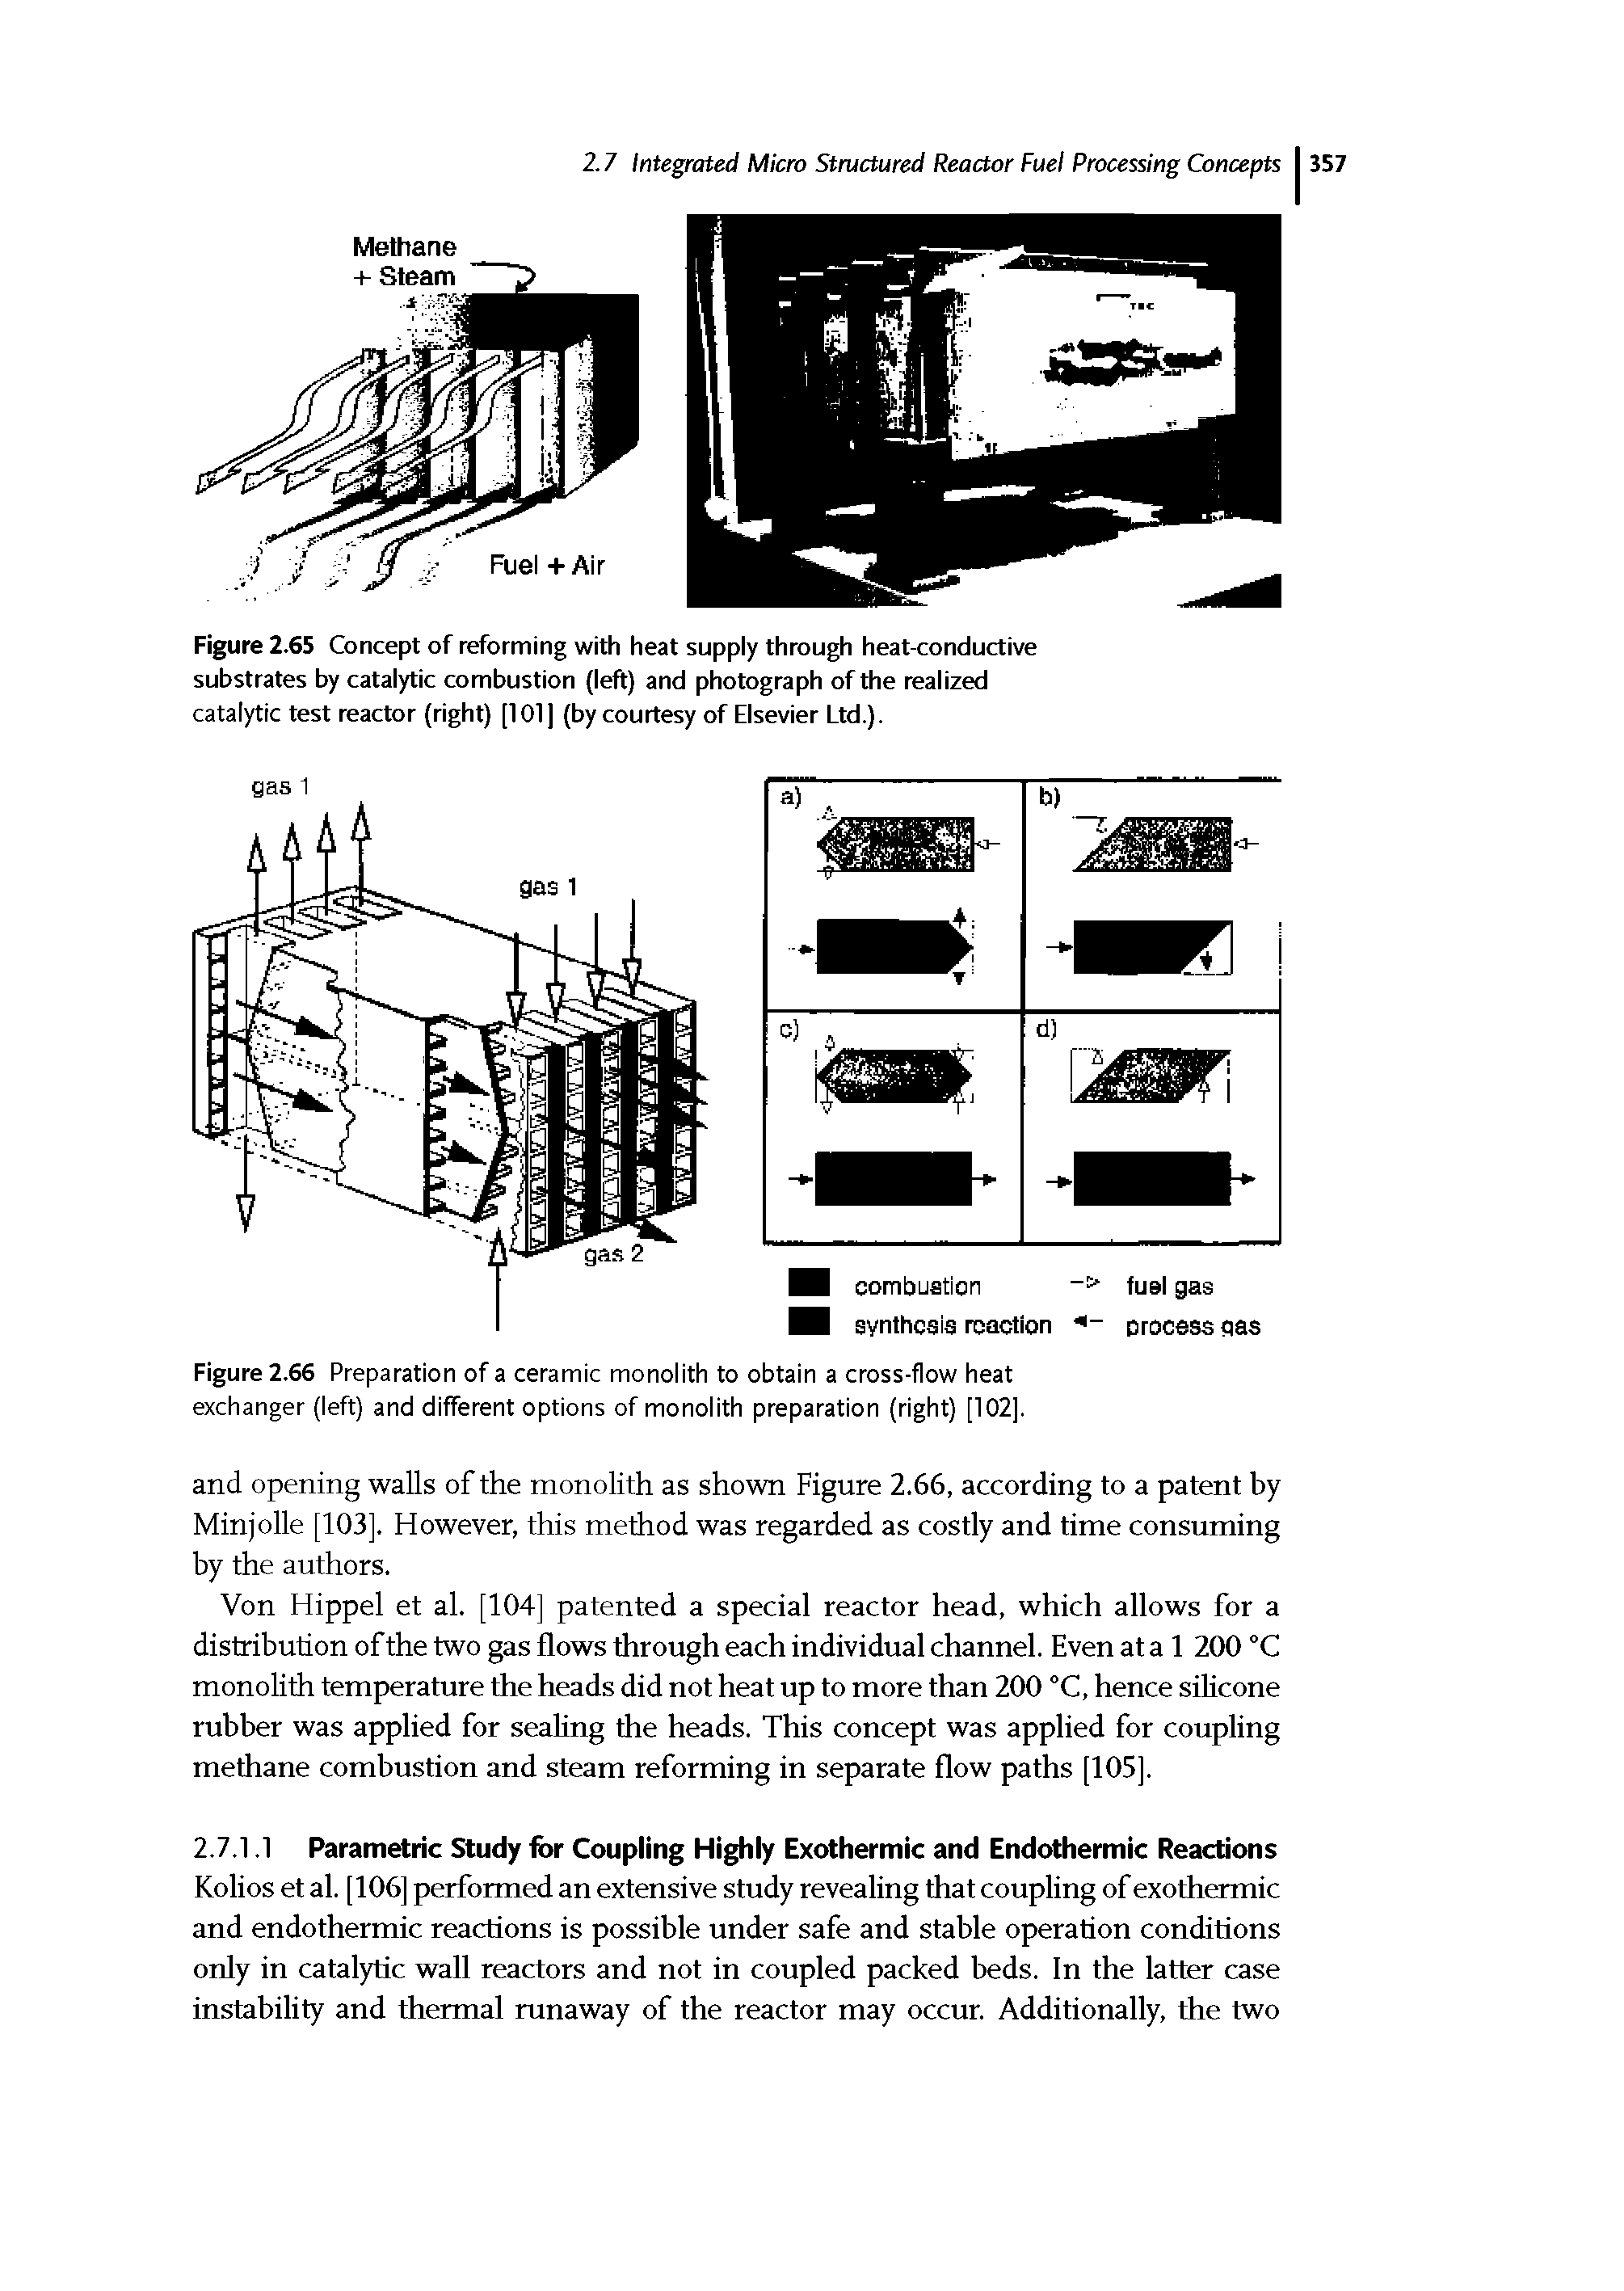 Figure 2.66 Preparation of a ceramic monolith to obtain a cross-flow heat exchanger (left) and different options of monolith preparation (right) [102].